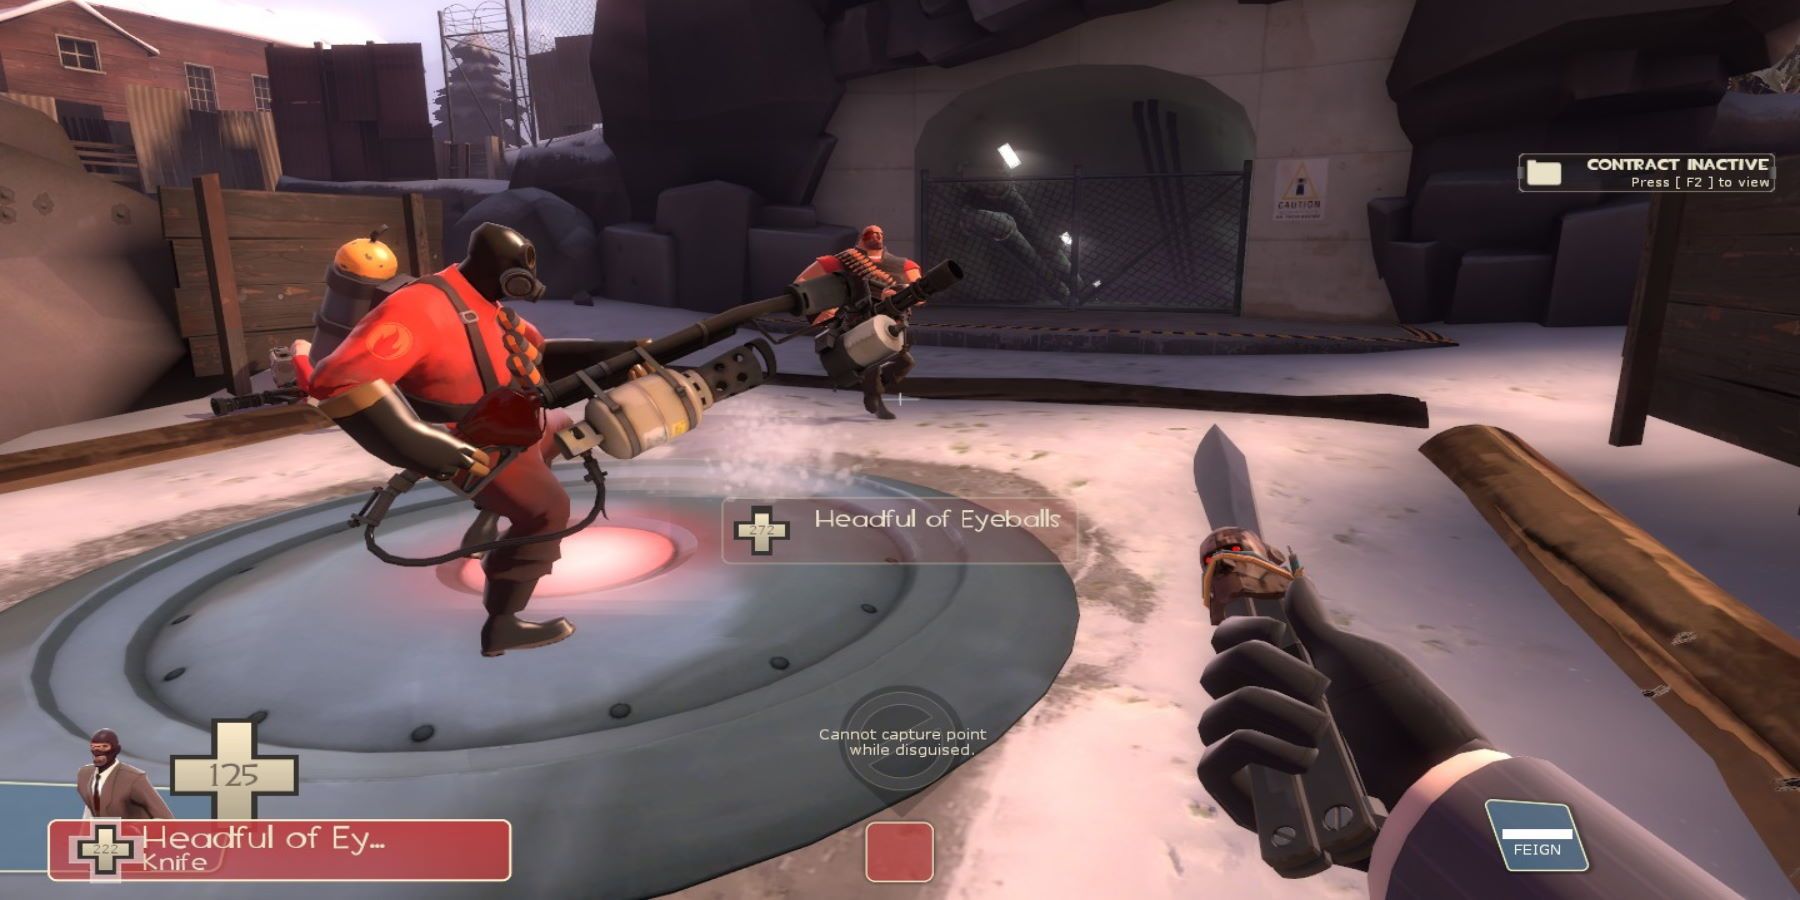 A Spy holding a knife on a capture point near a Pyro and Heavy